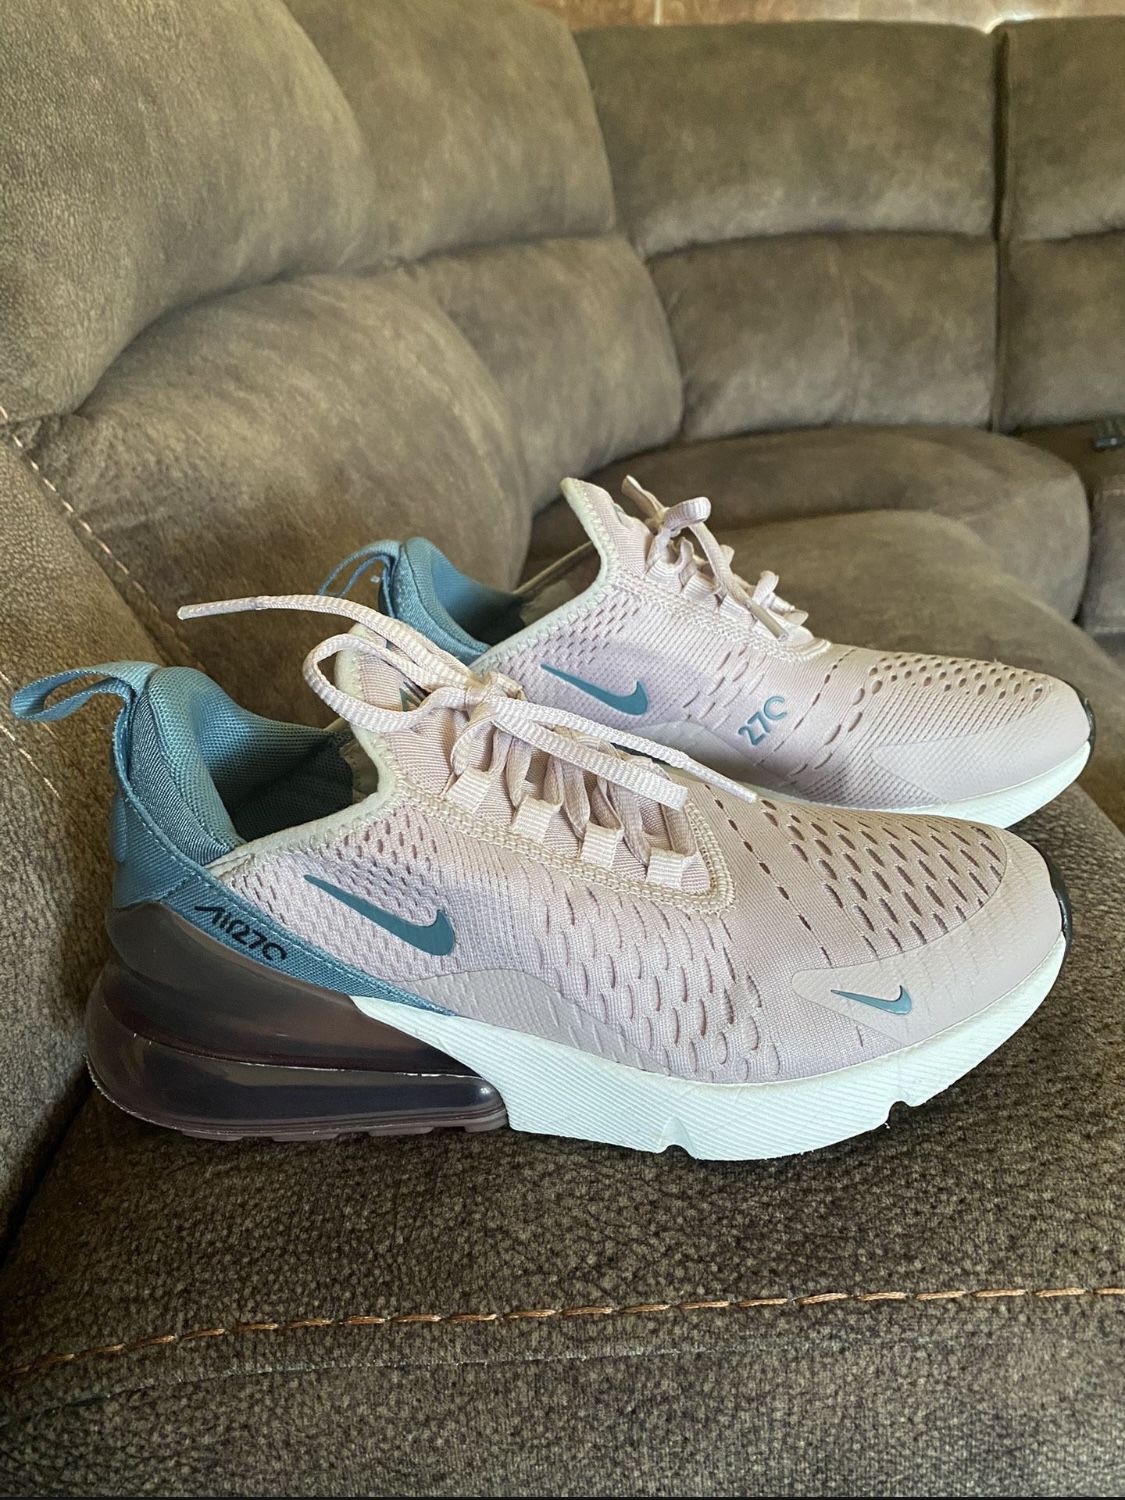 Nike shoes size 7 for women's